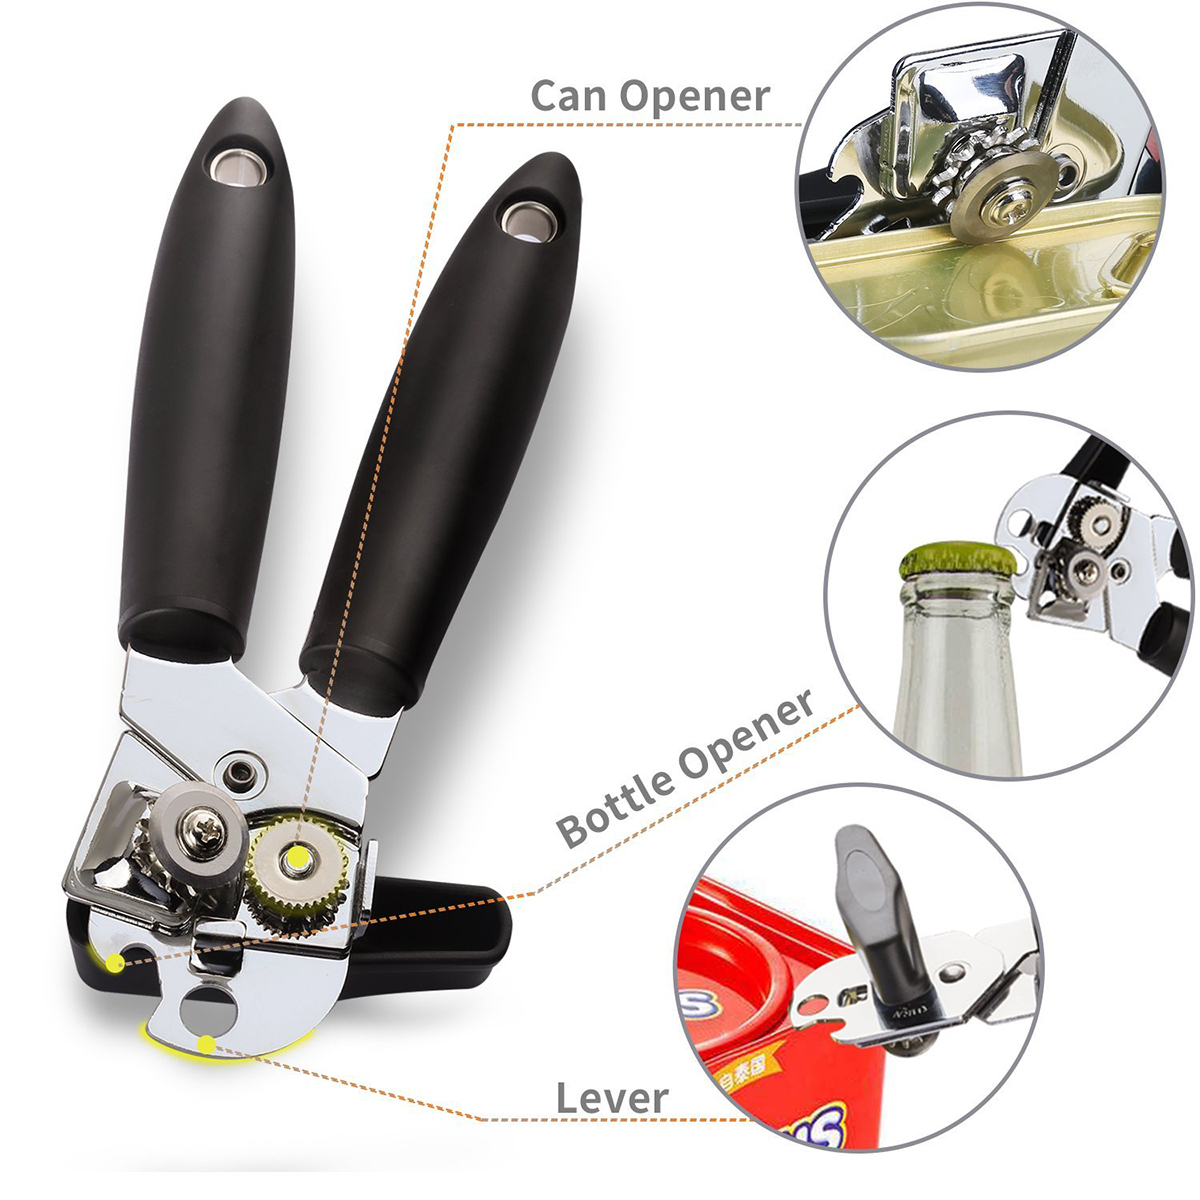 3-IN-1 Manual Can Opener Can Opener Stainless Steel Kitchen Bottle Opener with Smooth Edge Large Turn Knob Sharp Blades Ergonomic Anti Slip Grip Handle